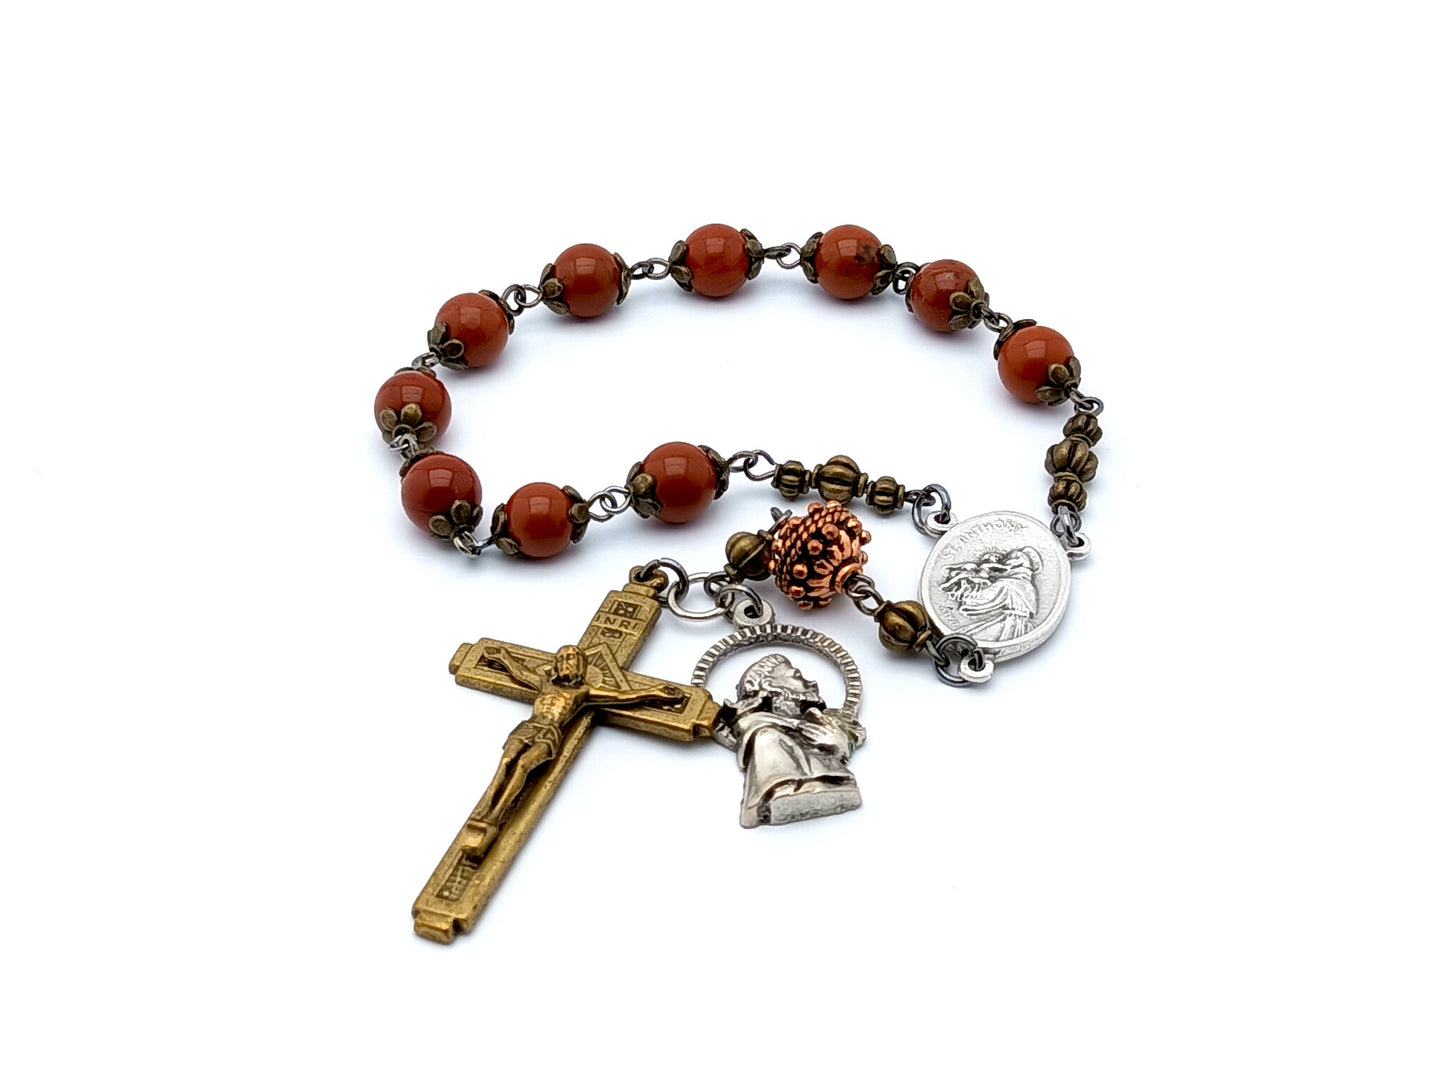 Saint Francis vintage style single decade jasper gemstone rosary beads with relic medal.